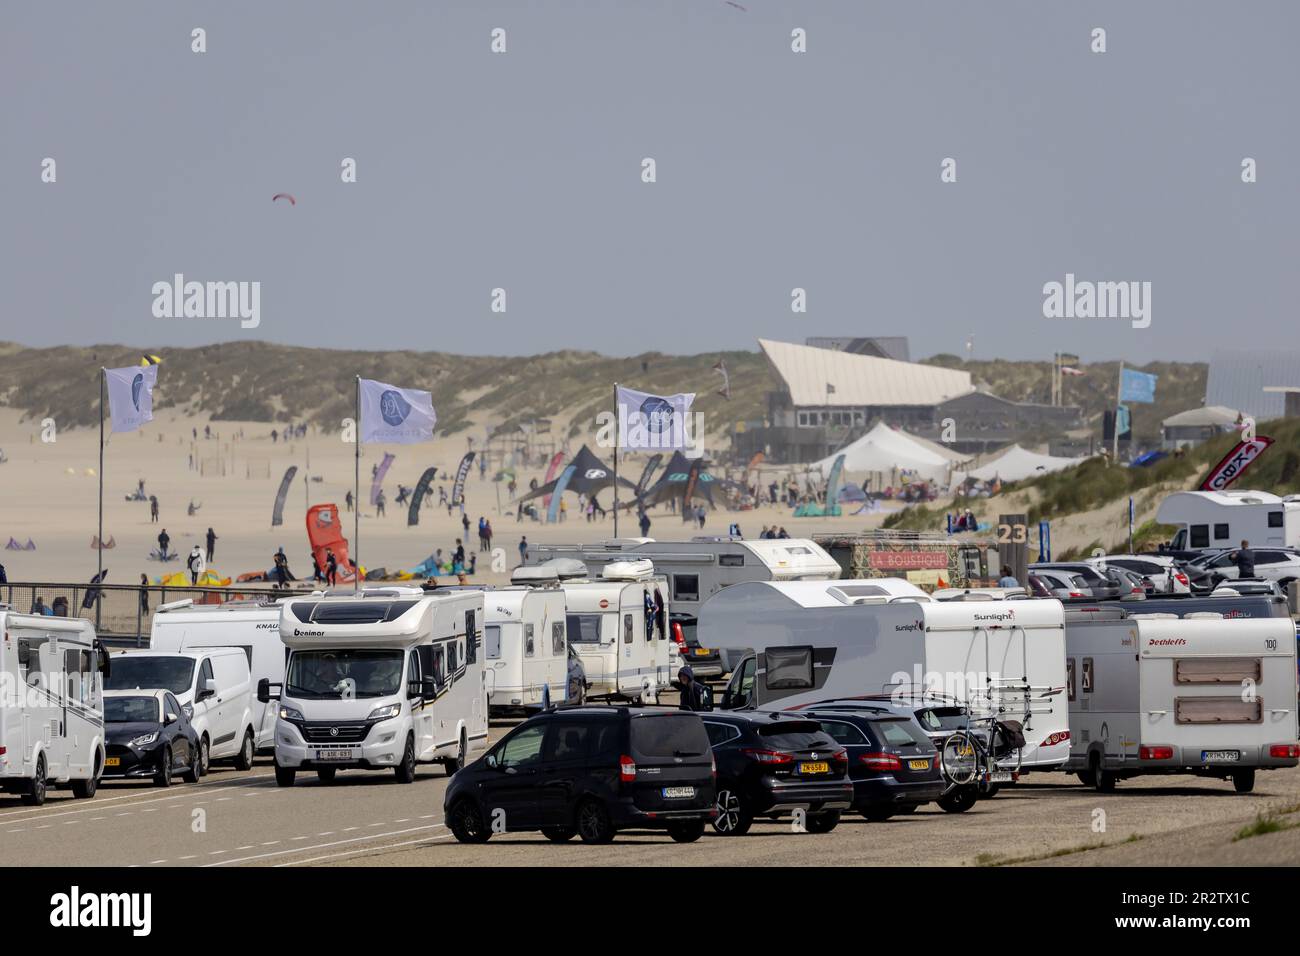 SCHARENDIJKE - Dozens of kite surfers practice their sport along the North Sea beach of the Brouwersdam. The North Sea side of the dam, on the border of Zeeland and South Holland, is a magnet for water sports enthusiasts. ANP ROBIN VAN LONKHUIJSEN netherlands out - belgium out Credit: ANP/Alamy Live News Stock Photo